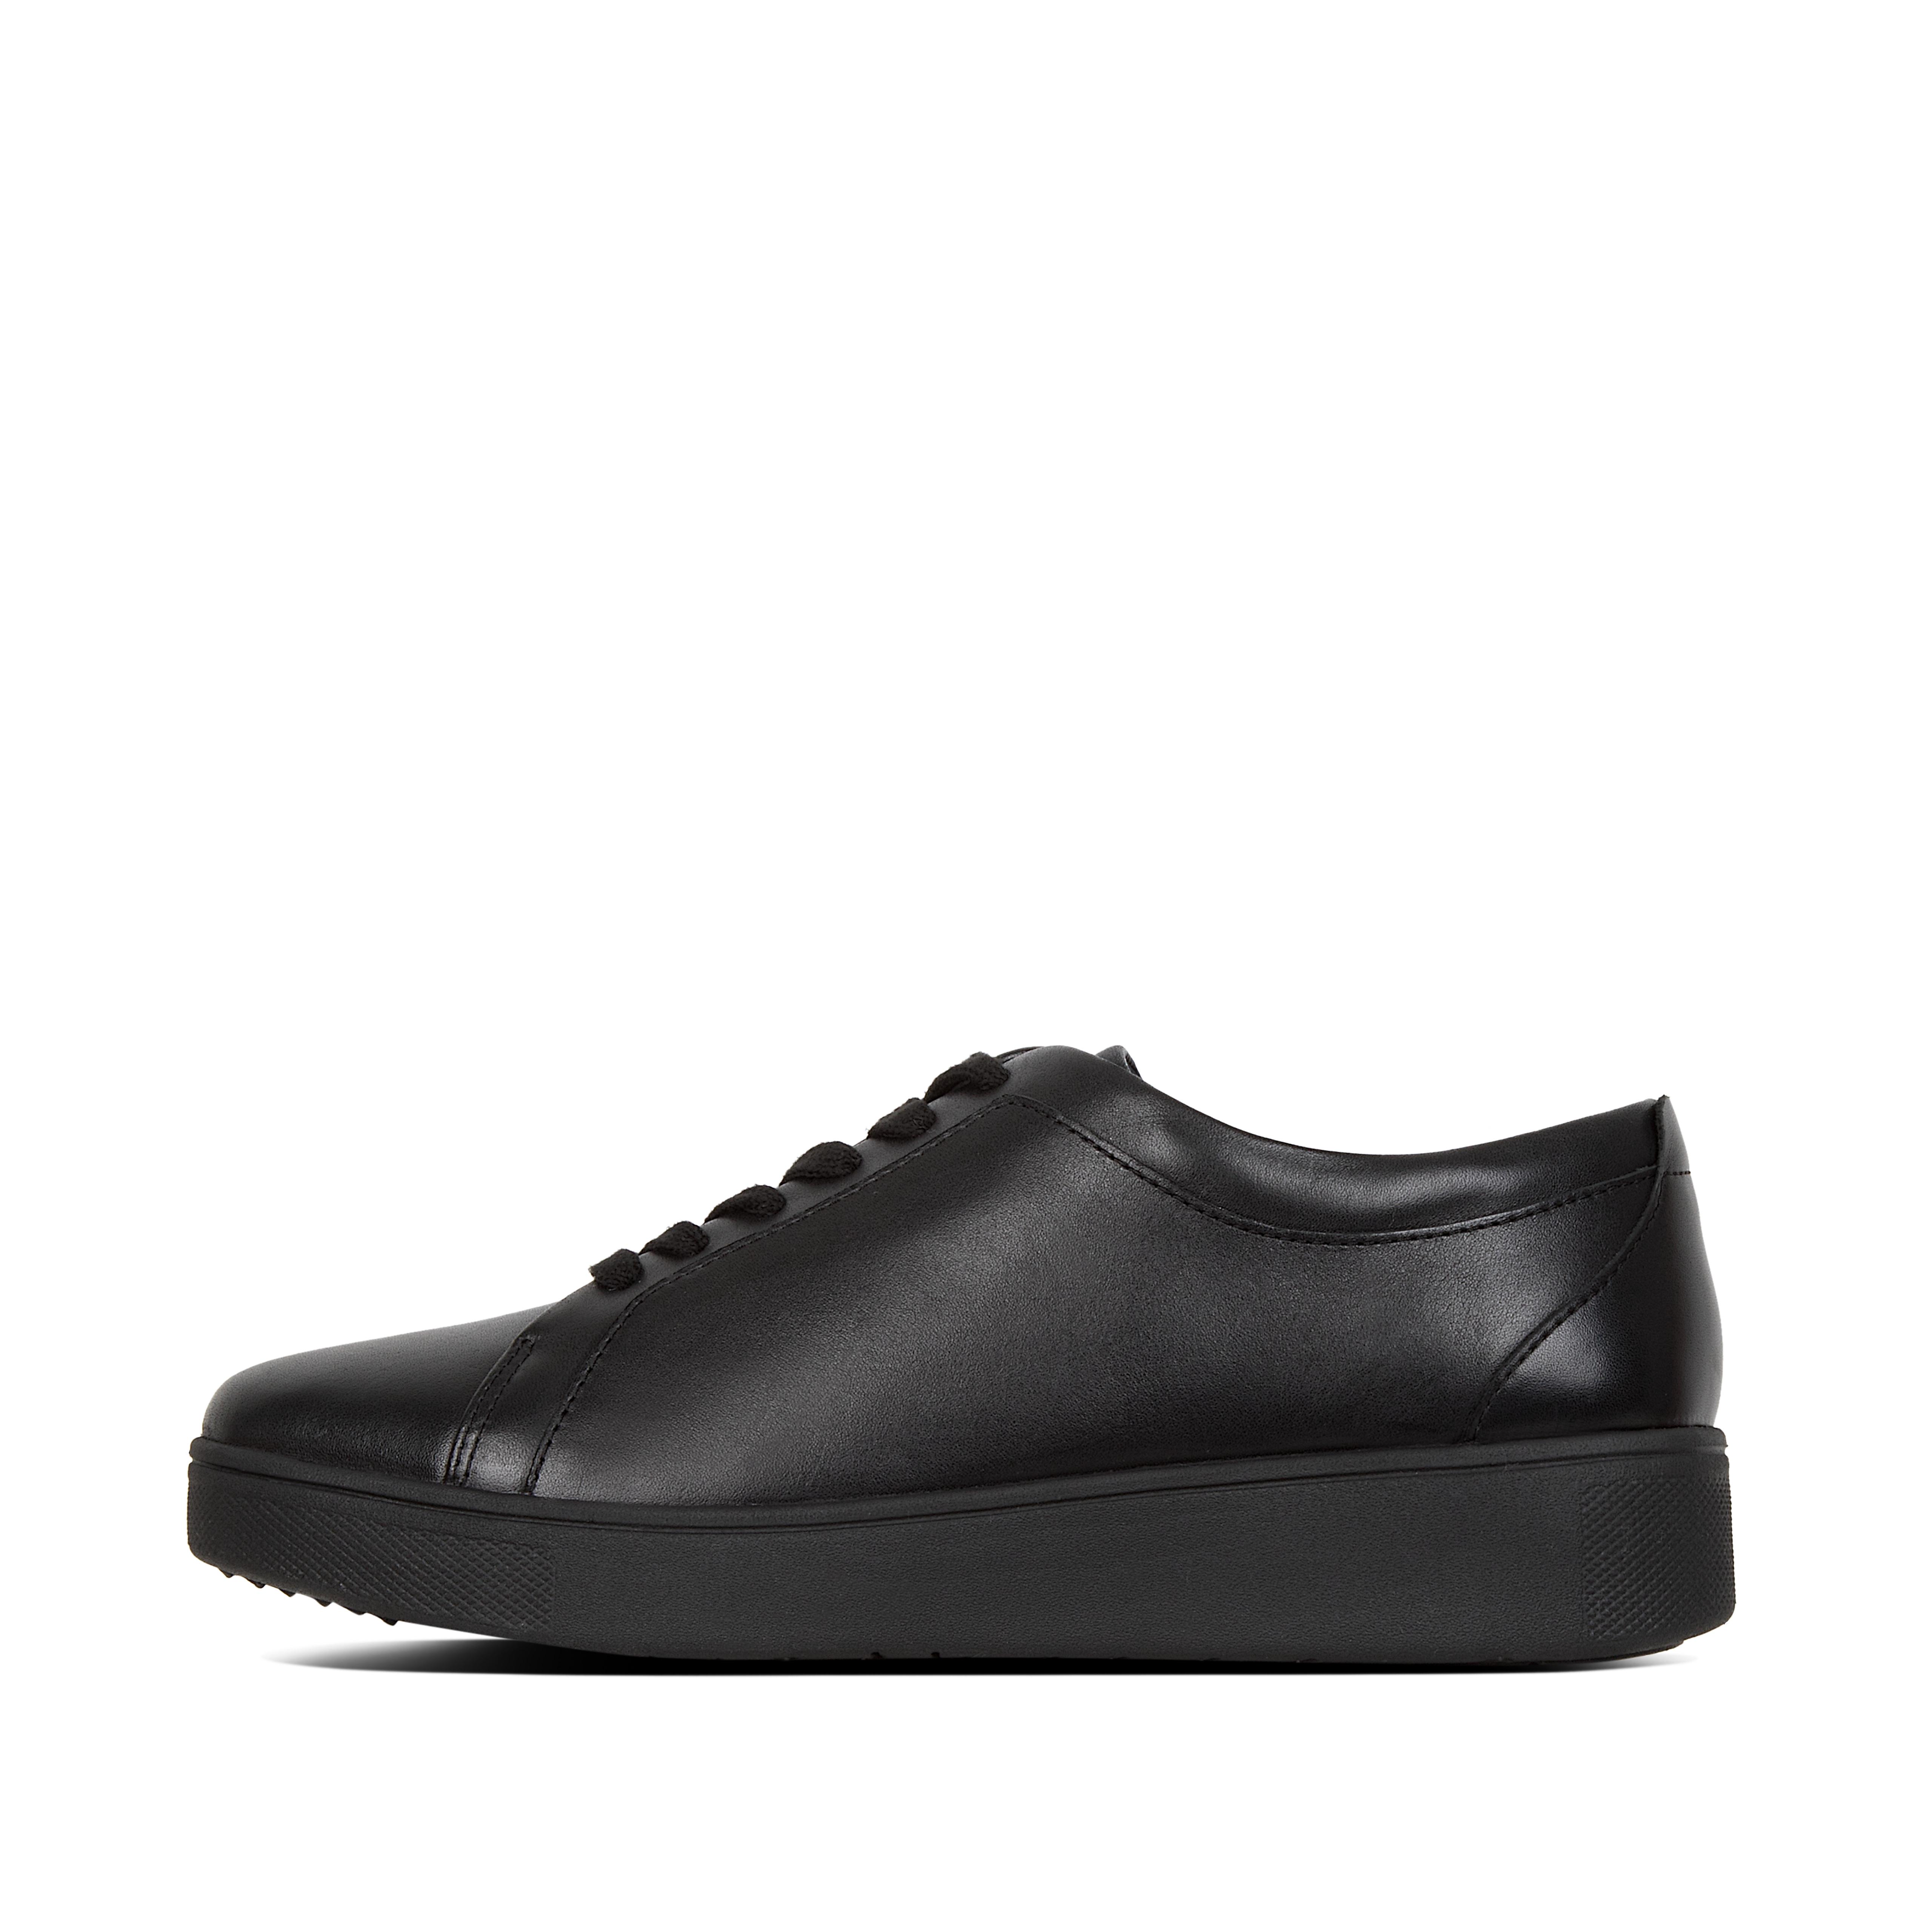 black leather tennis shoes